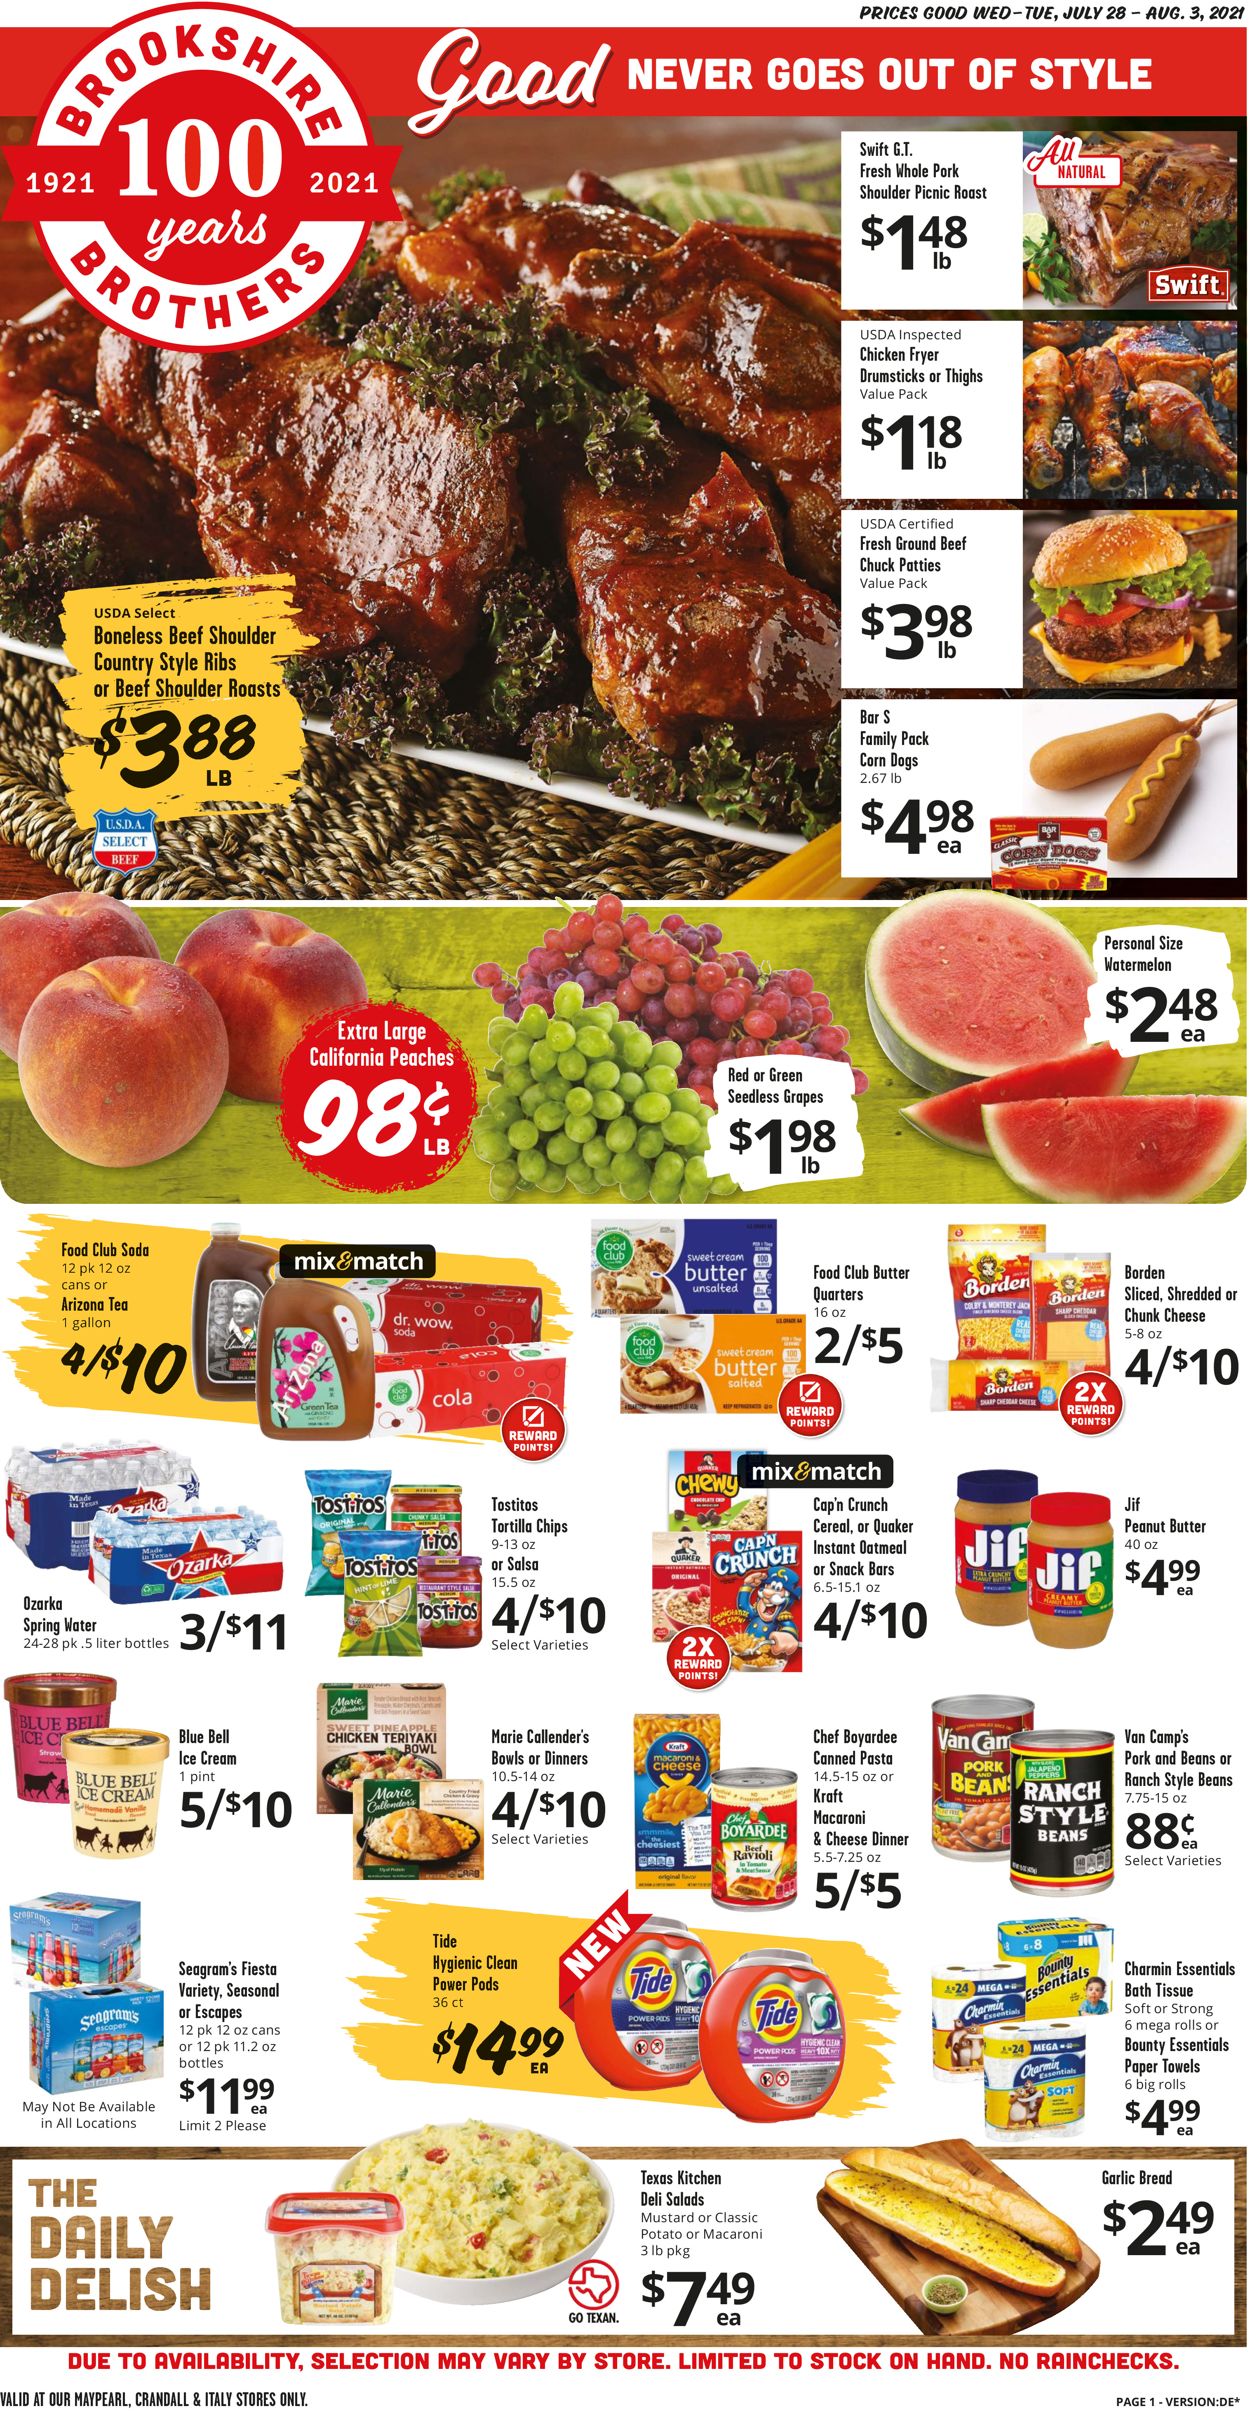 Brookshire Brothers Current weekly ad 07/28 - 08/03/2021 - frequent-ads.com